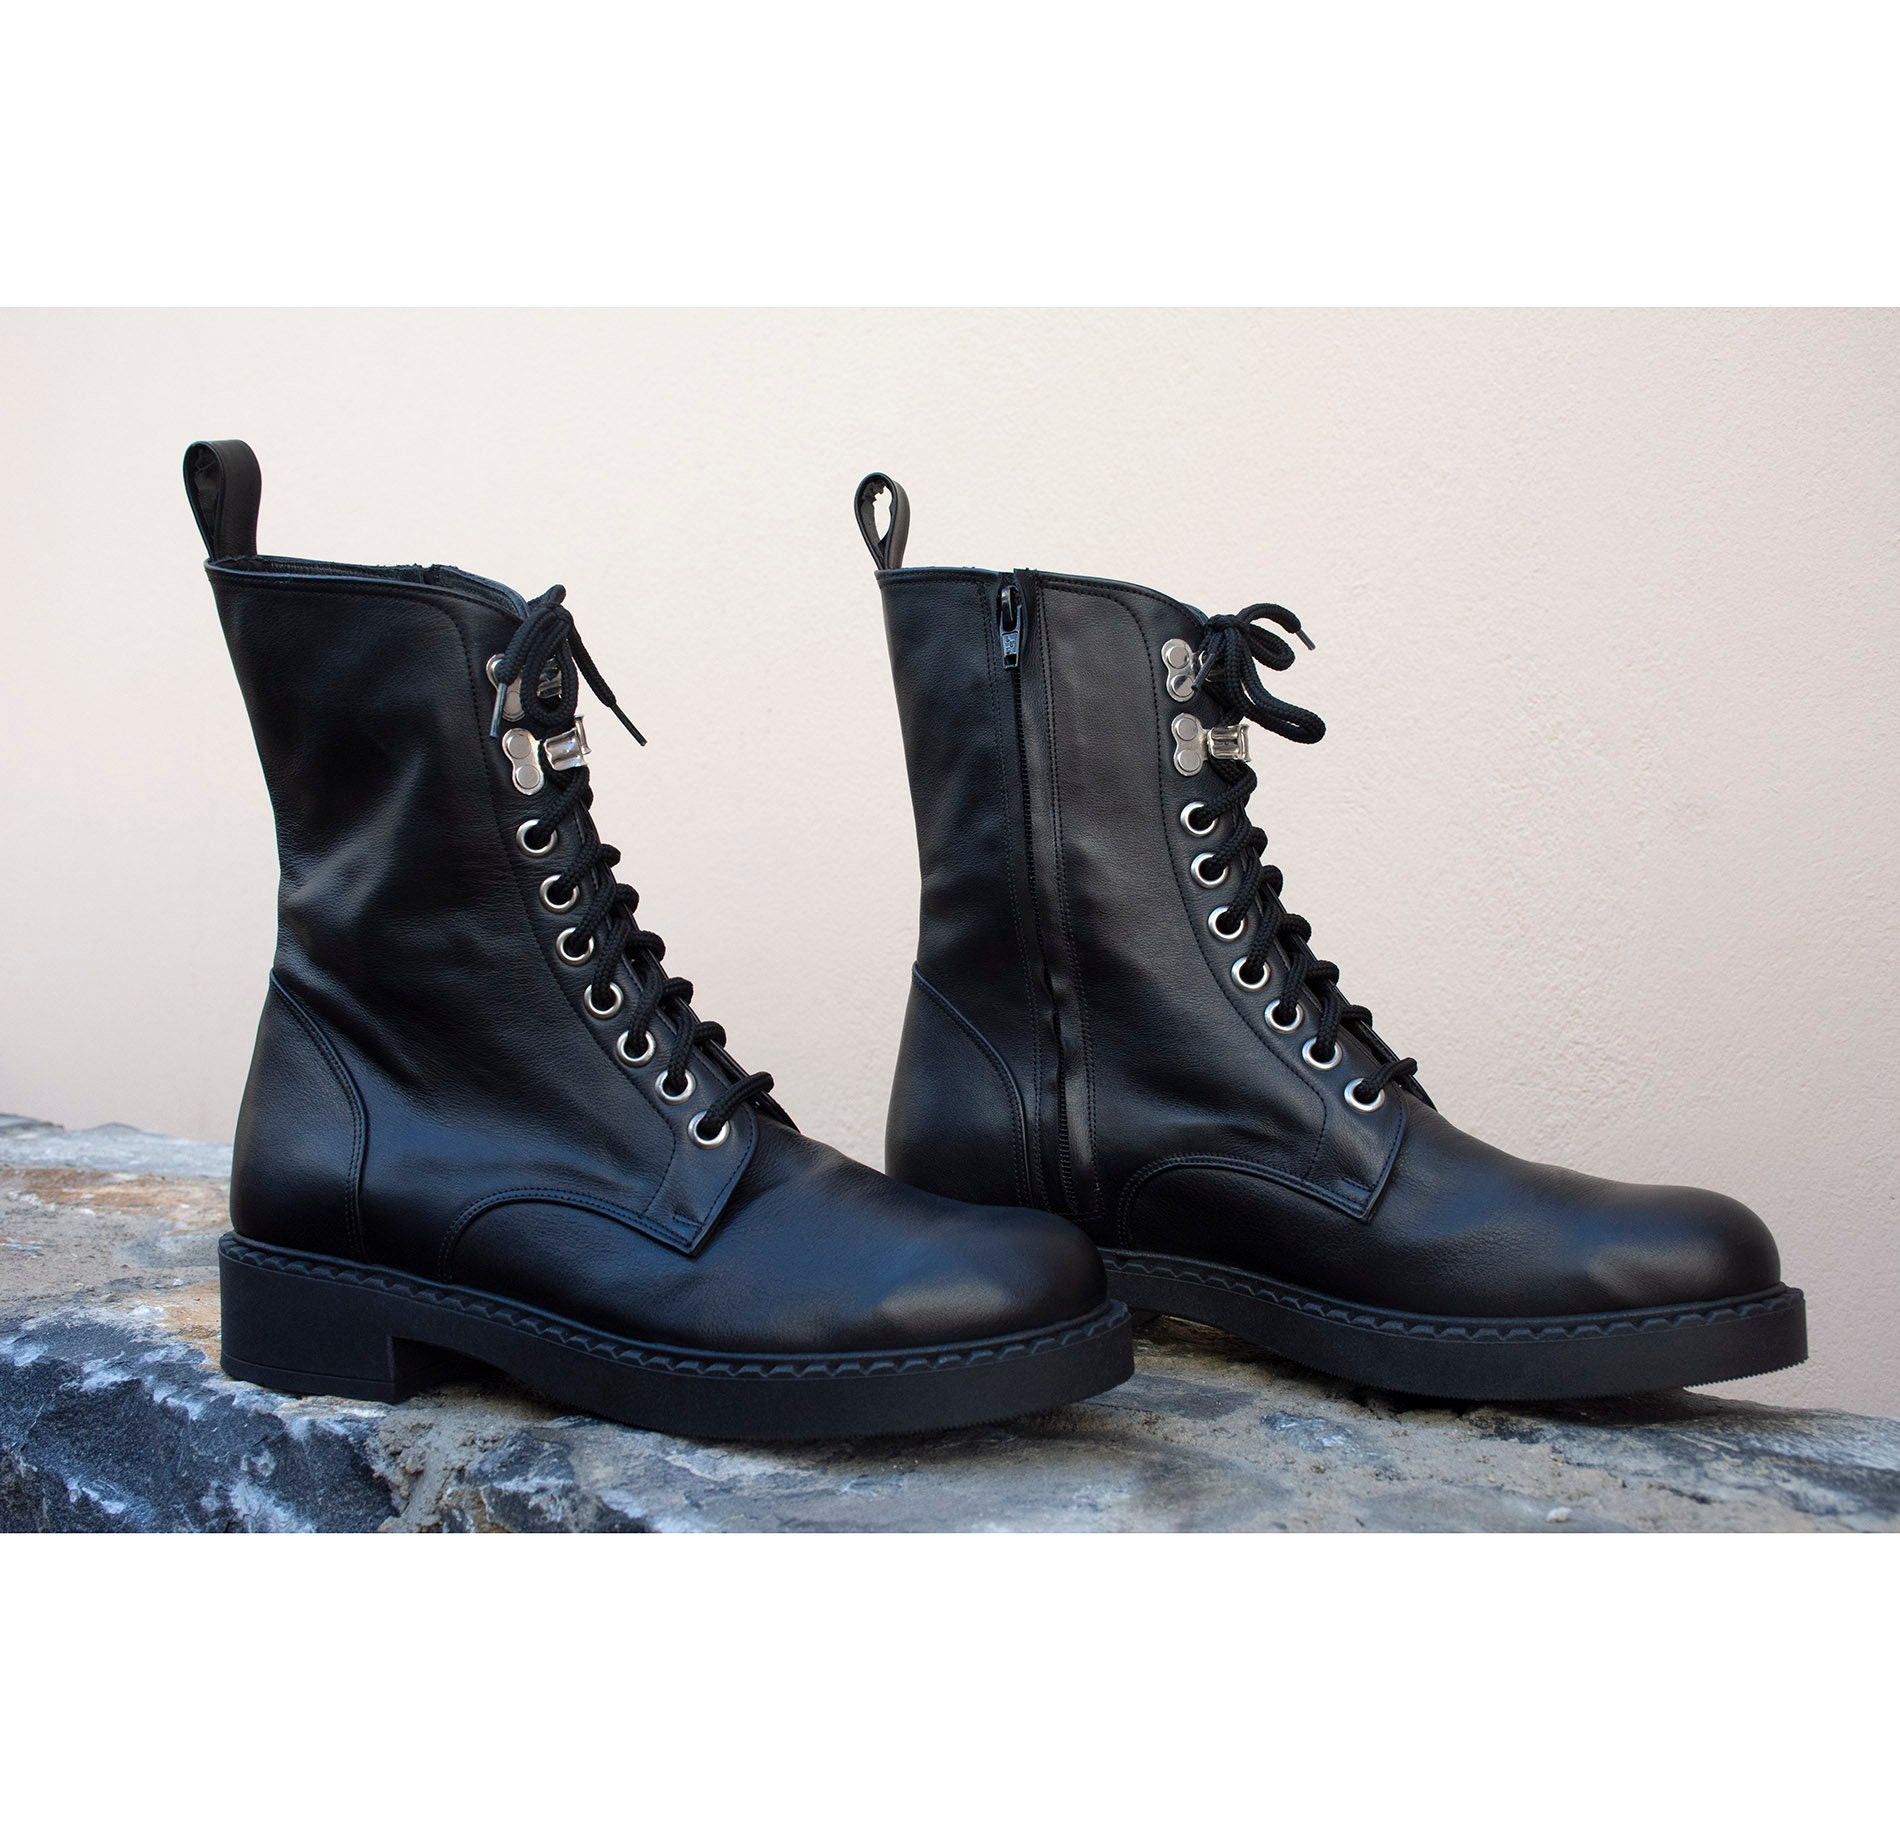 Shoes Womens Shoes Boots Booties & Ankle Boots Womens Platform Boots,Goth Boots,Gothic Boots,Gothic Platform Boots,90s Platform Shoes,Lace up Boots,Leather Boots,Handmade Boots,Witchy 